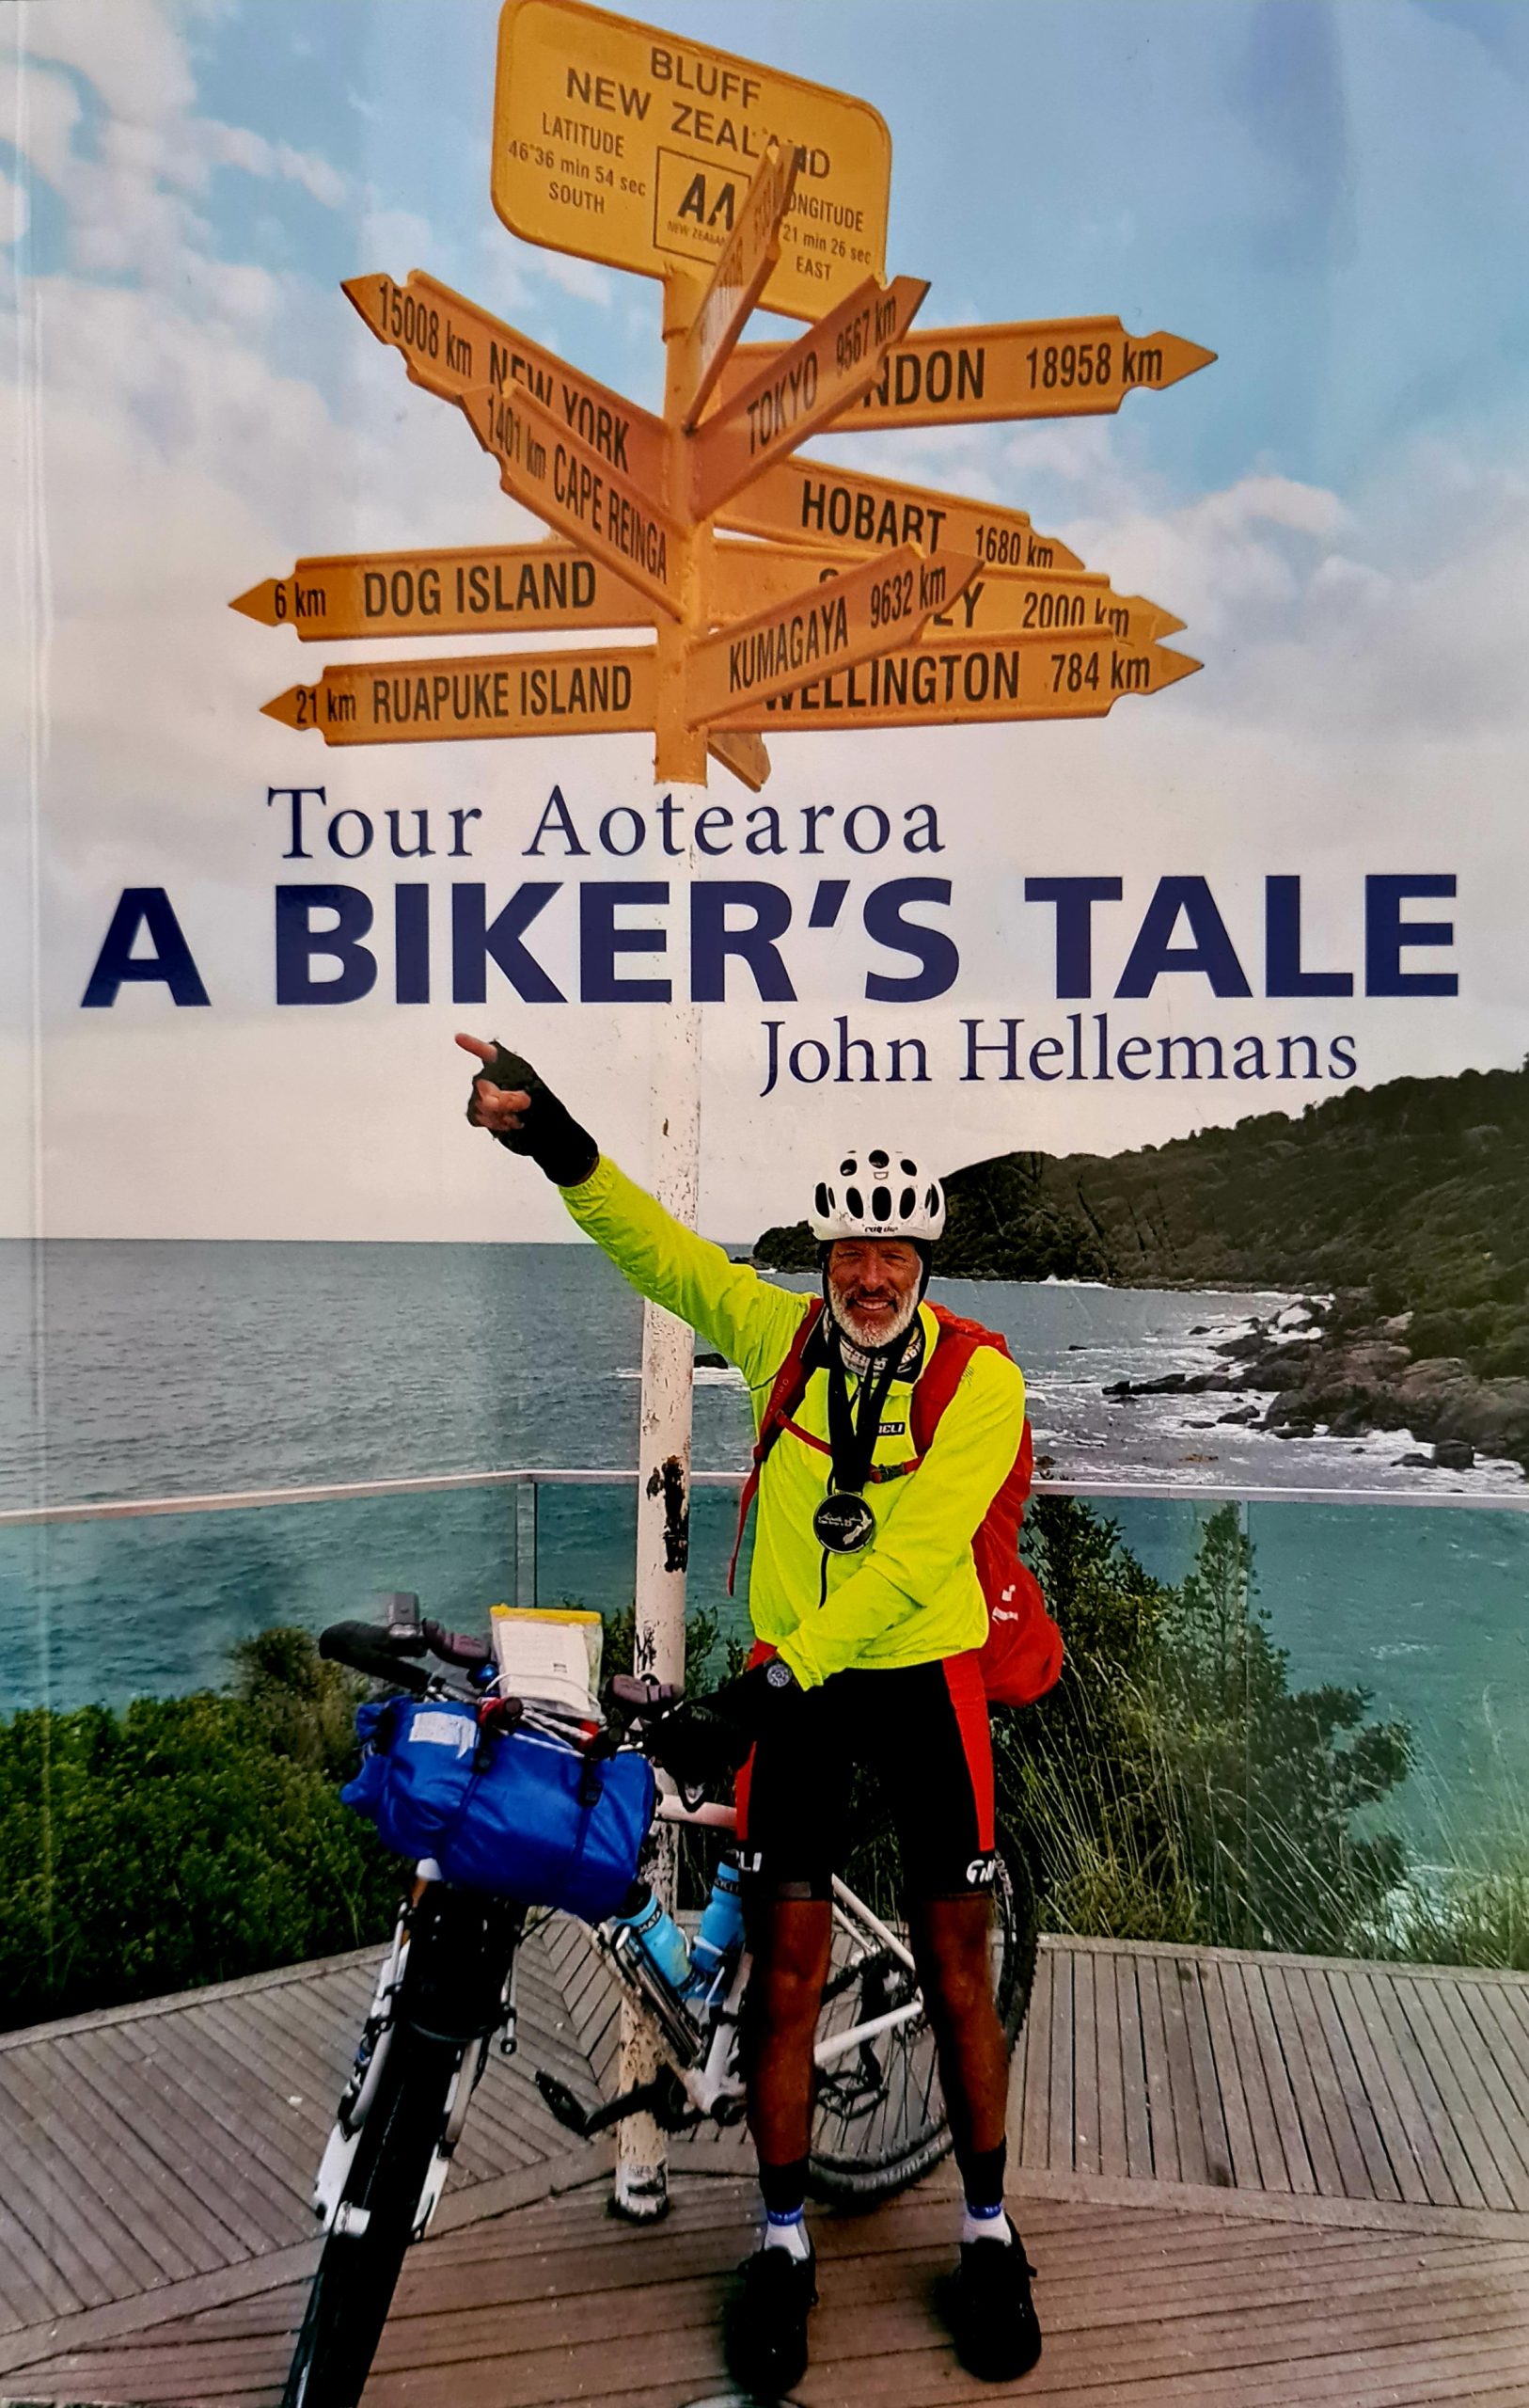 Book Reviews: A Biker’s Tale and A Life of Extremes